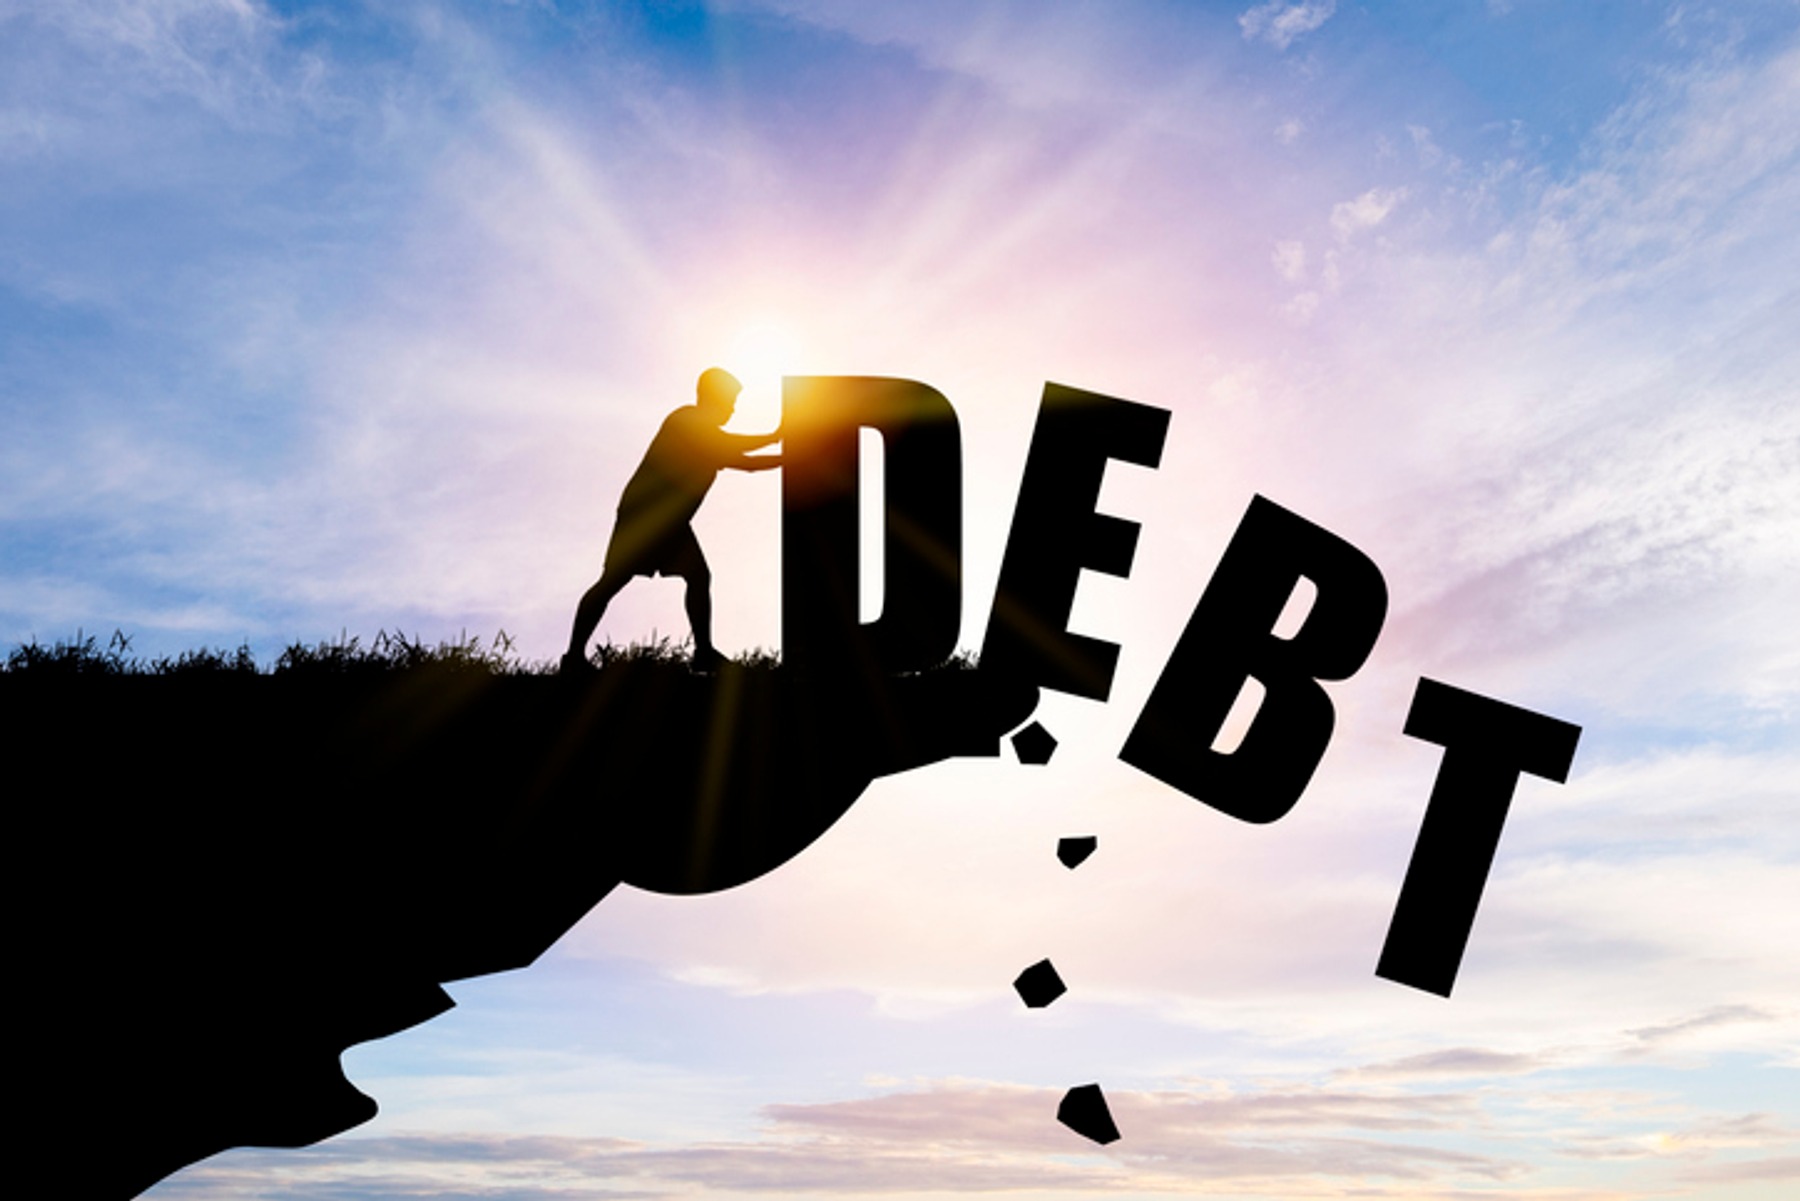 Silhouette view of a person pushing giant letters that spell "debt" off a cliff.